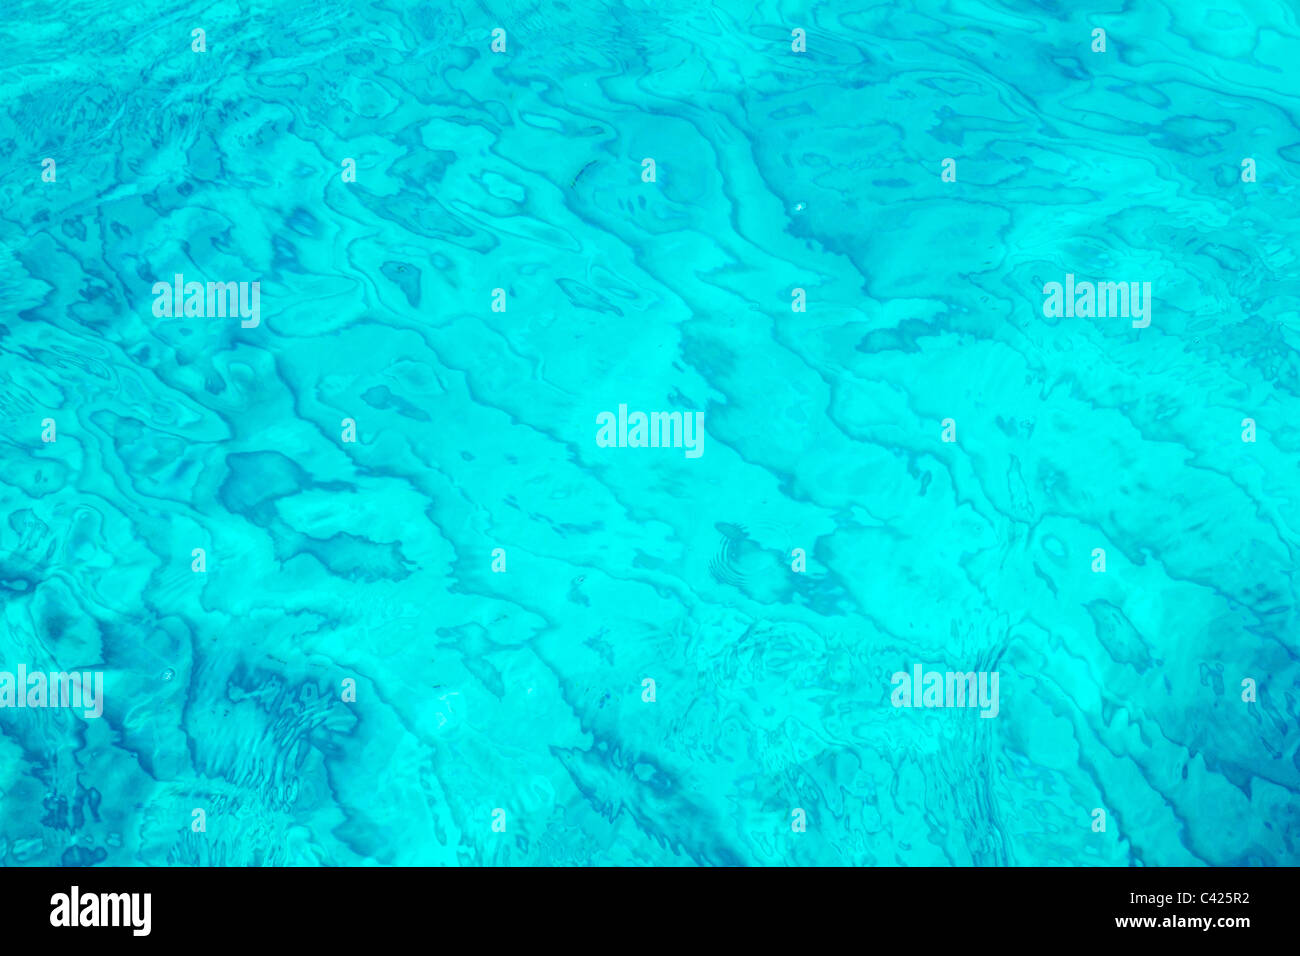 aqua turquoise tropical beach water waves pattern texture Stock Photo